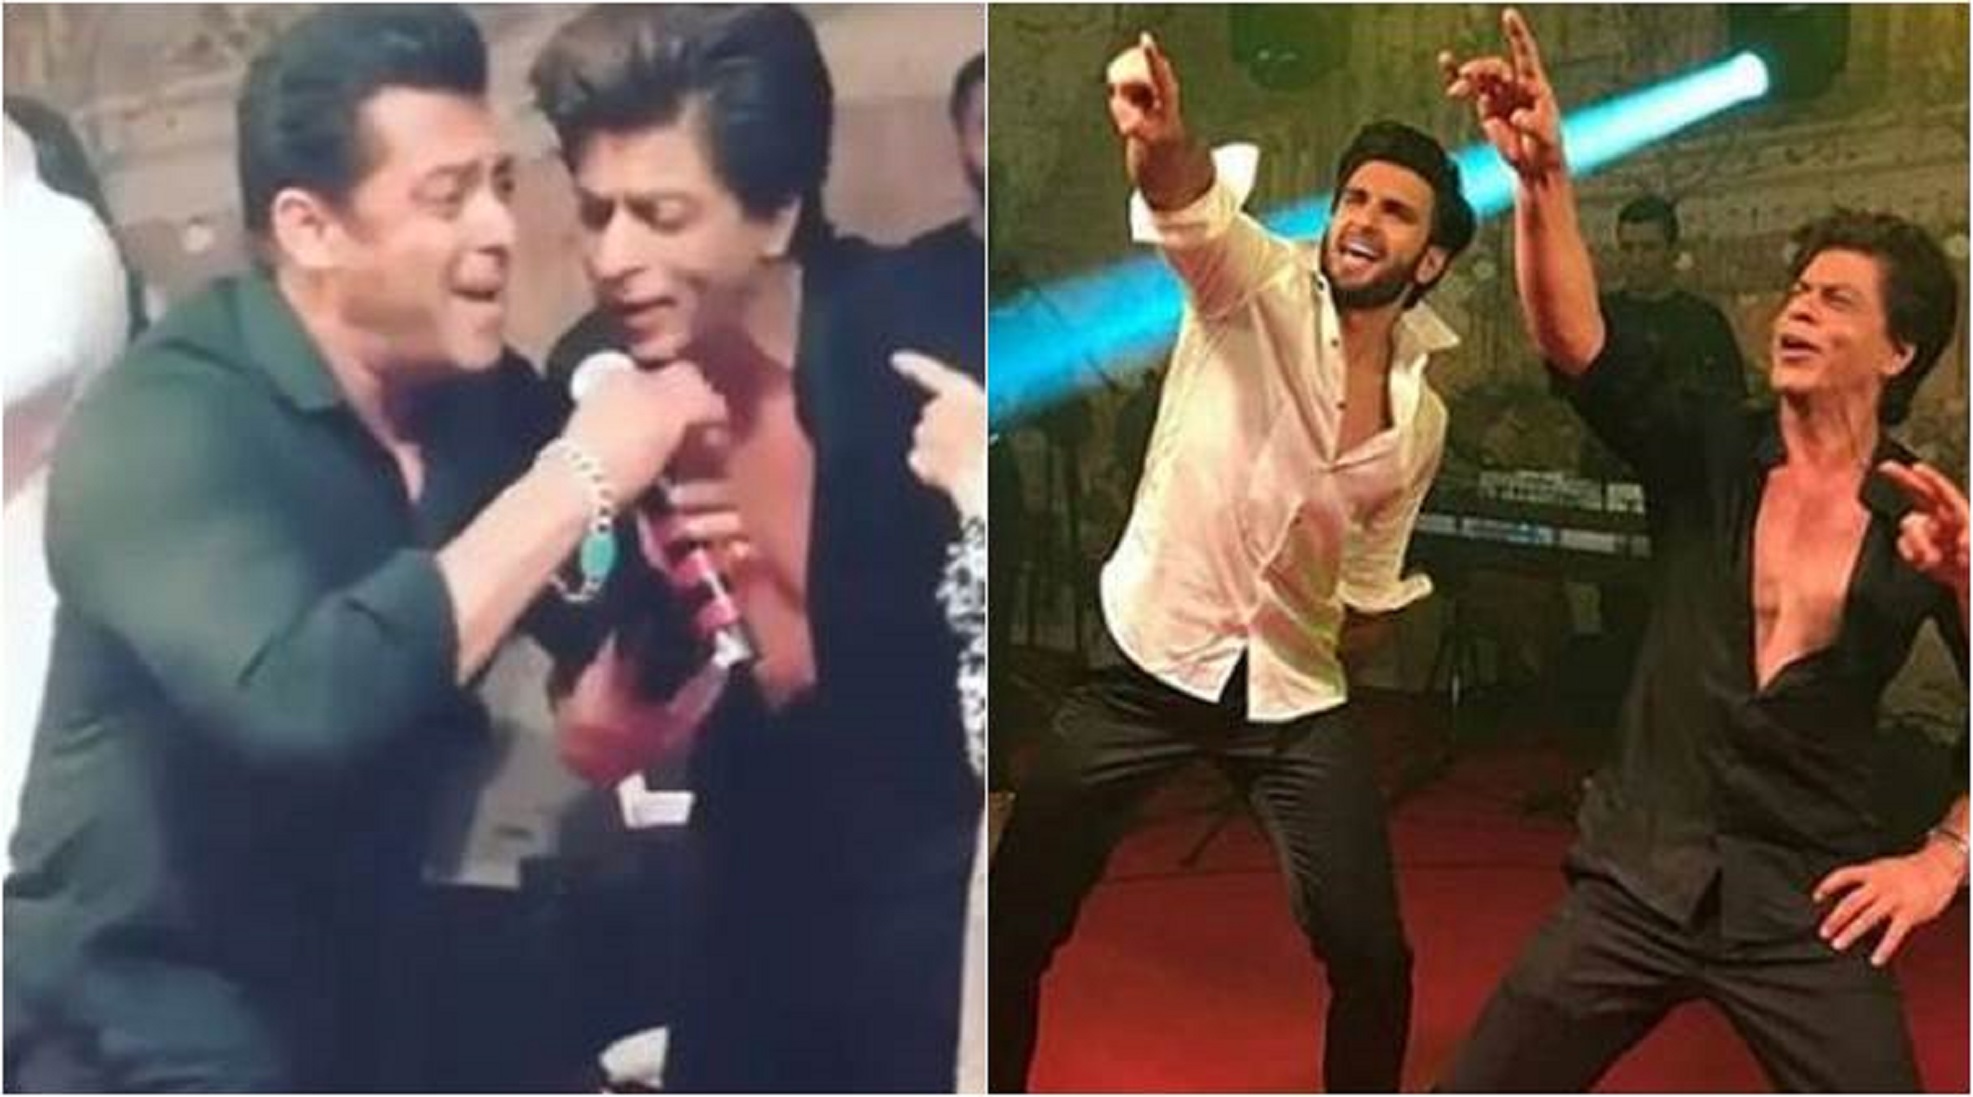 Video Of Salman Khan and Shah Rukh Khan Dancing Together Goes Viral, After Salman’s 57th Birthday Party